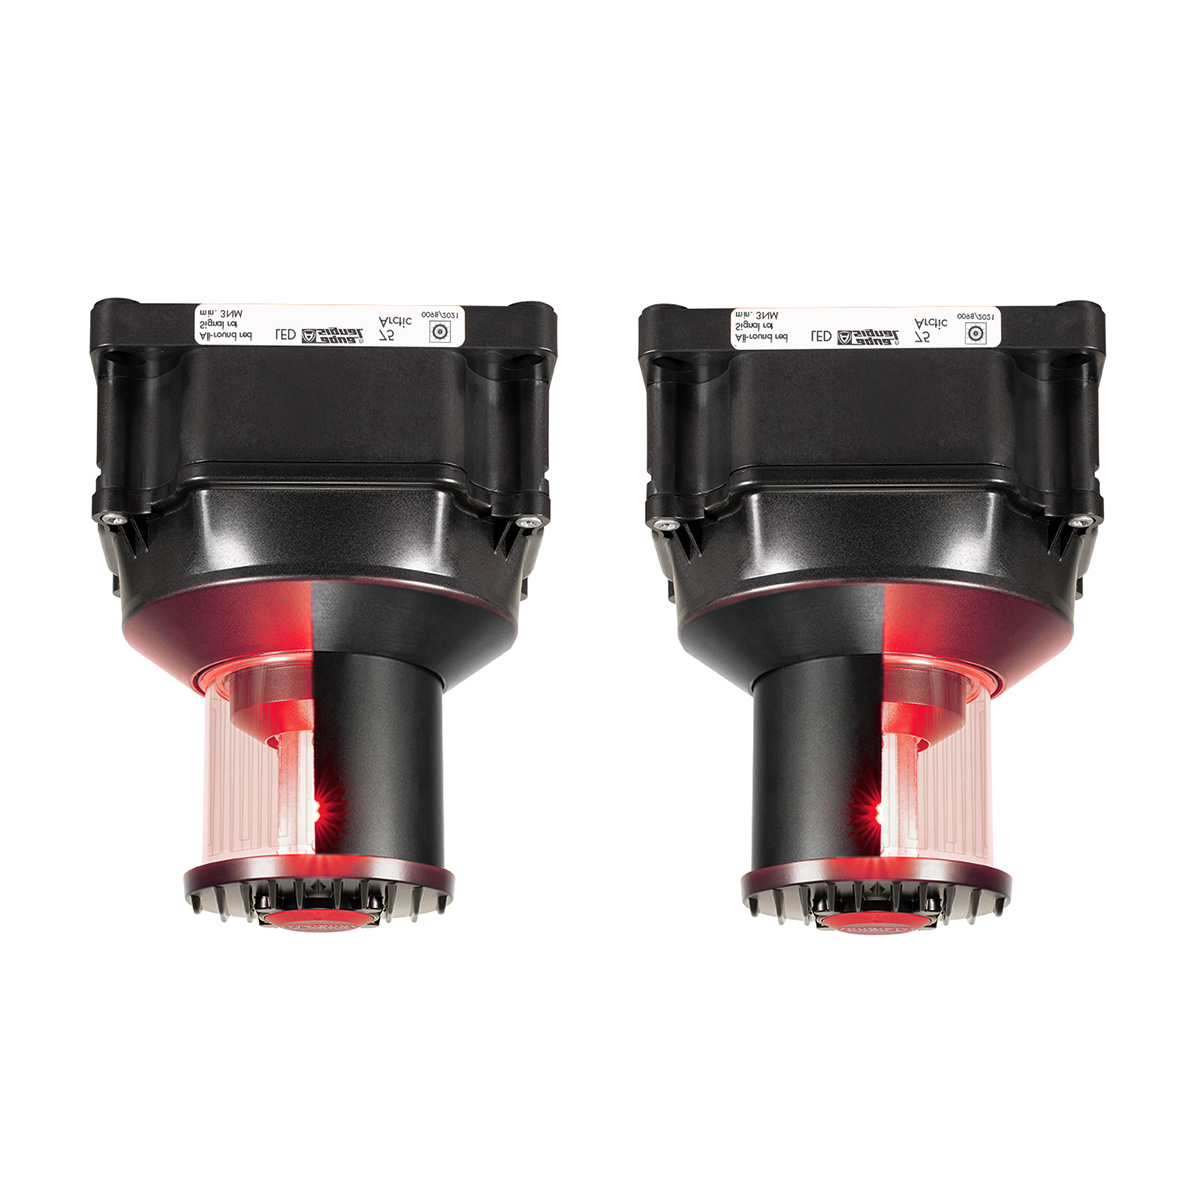 3675206007 75D LED Signal Red, main 115-230VAC/spare 24VDC UPSIDE DOWN 180°Starboard 180°Port Black, 3nm